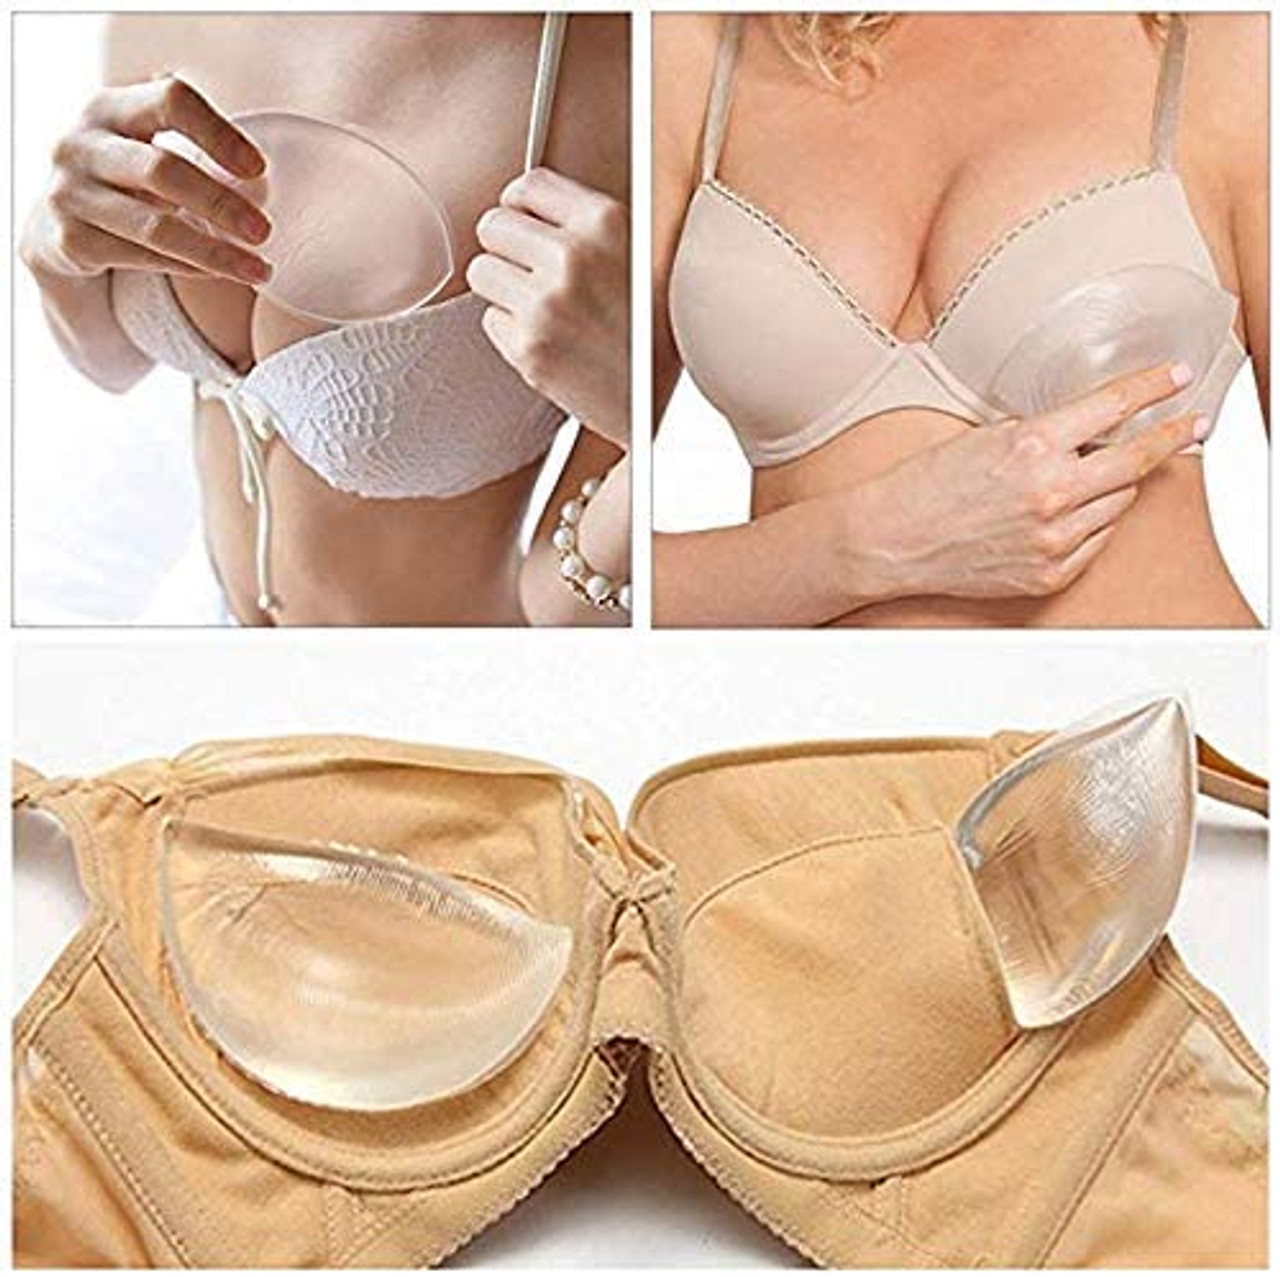 FUNCYboo 4 Pairs Silicone Bra Inserts Lift Breast Inserts